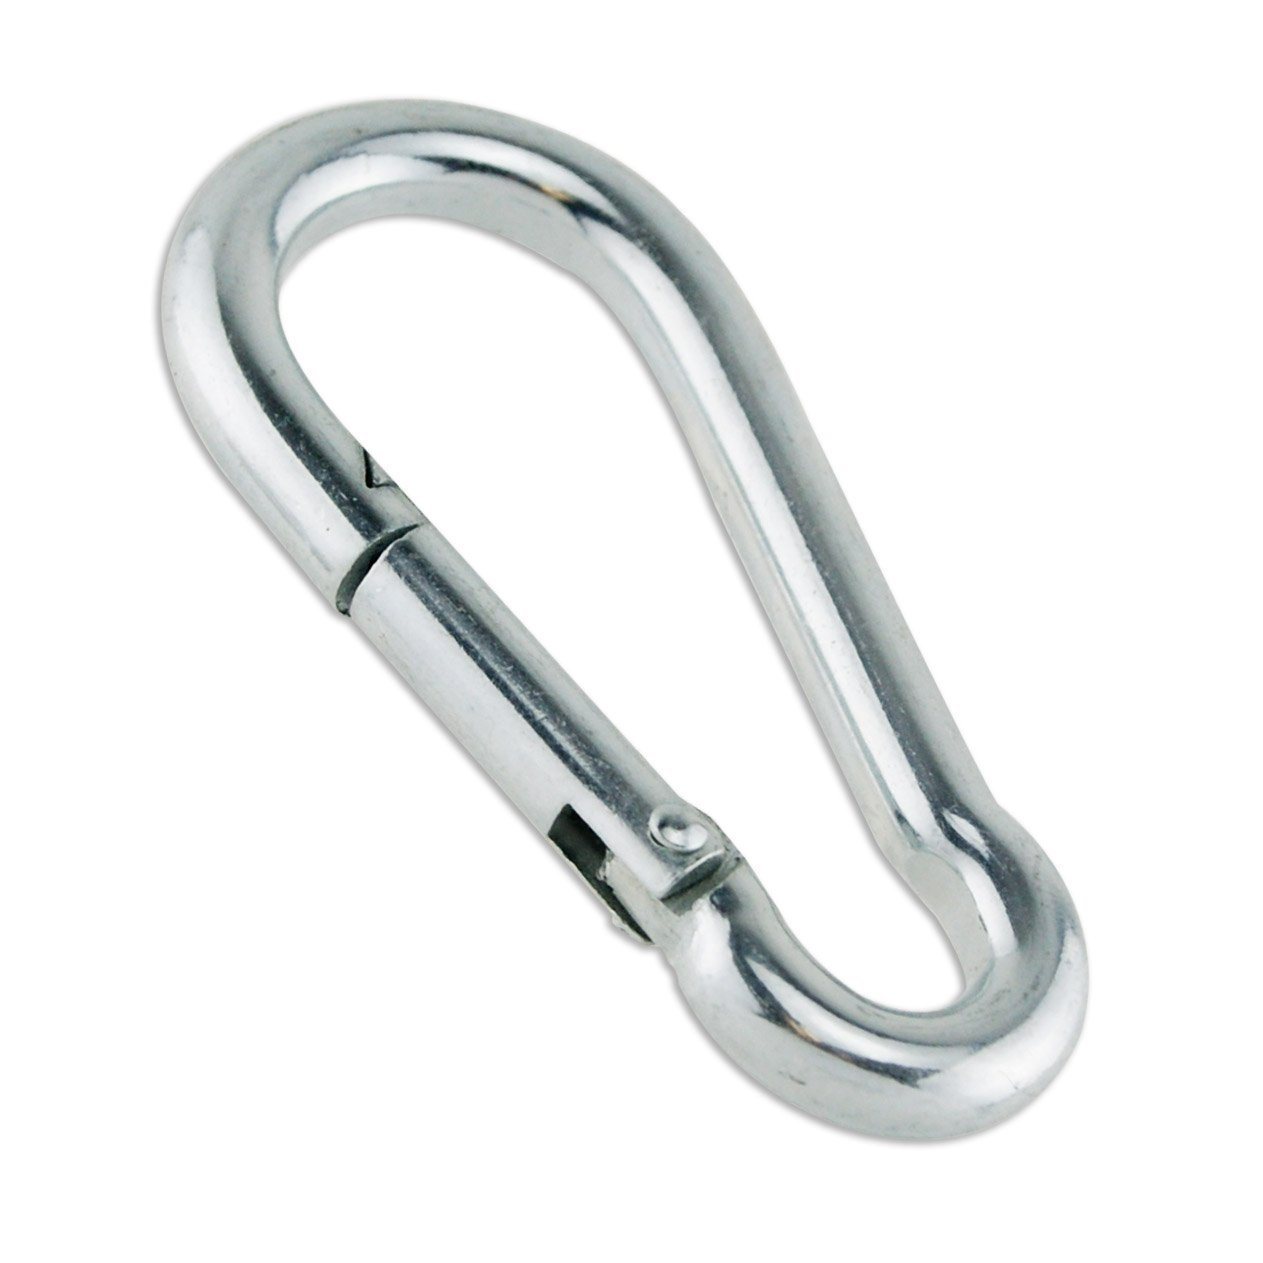 Cimarron Carabiners - Pitch Pro Direct